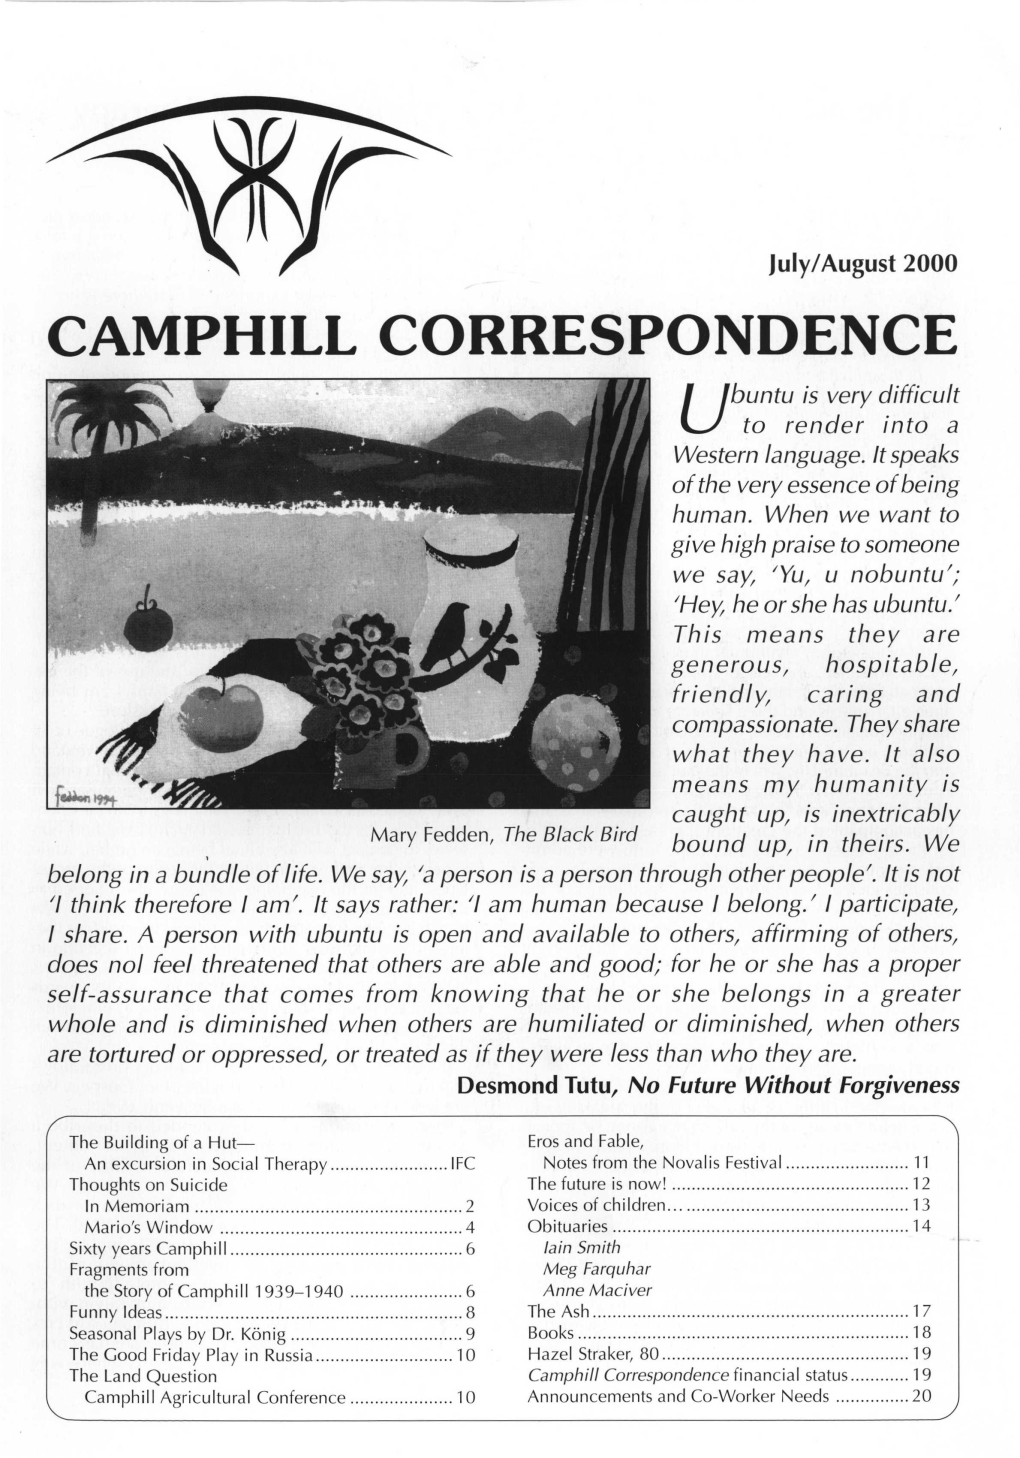 Camphill Correspondence July/August 2000